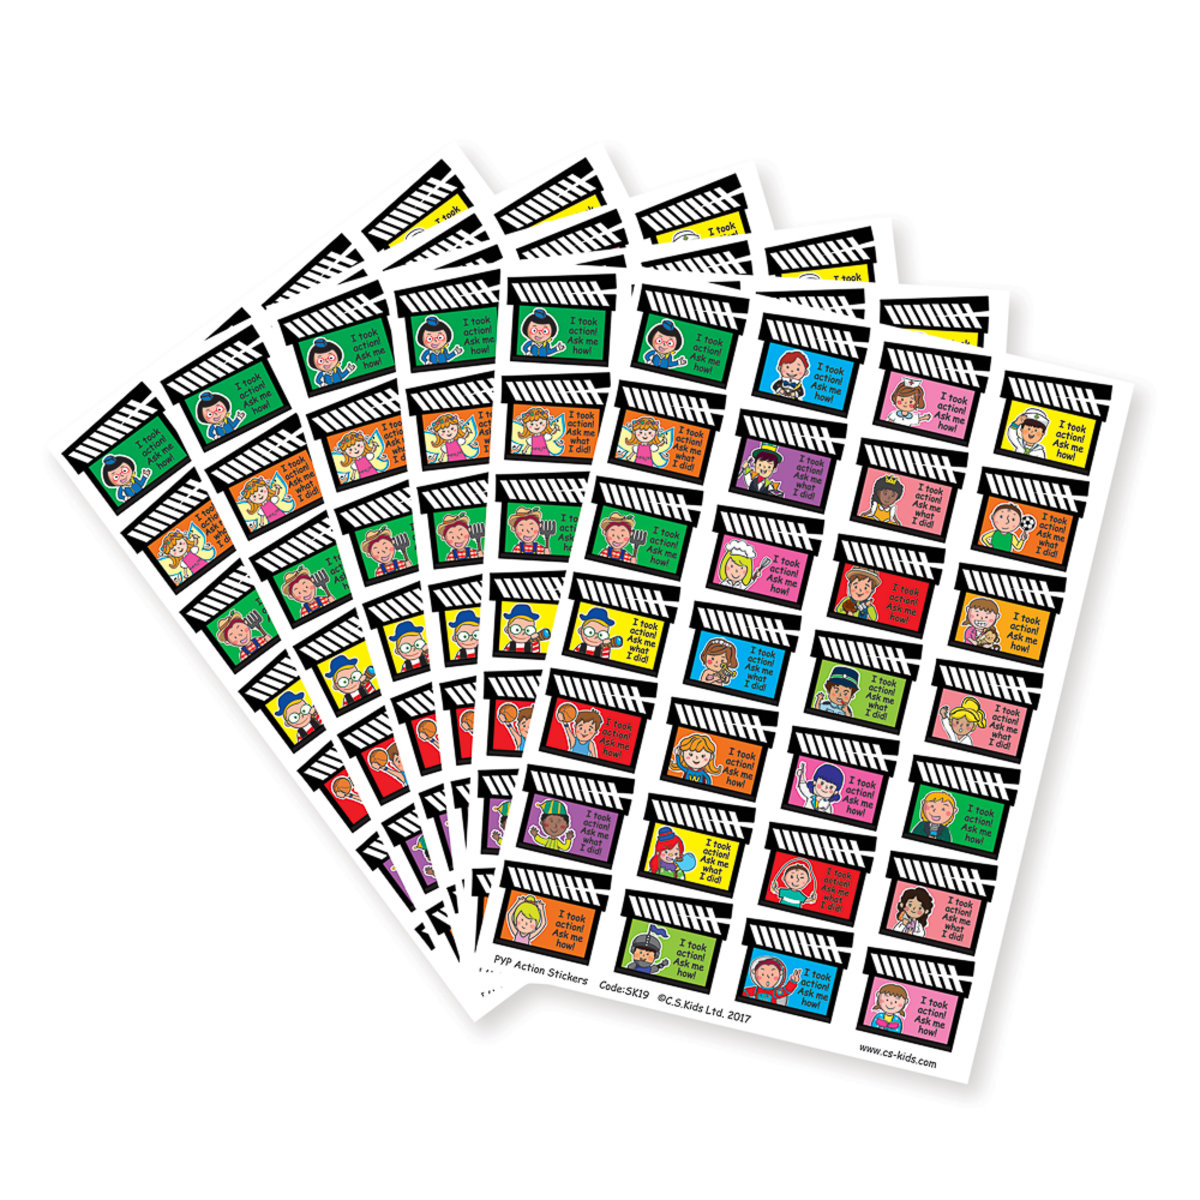 PYP Action Stickers (Pack of 168)